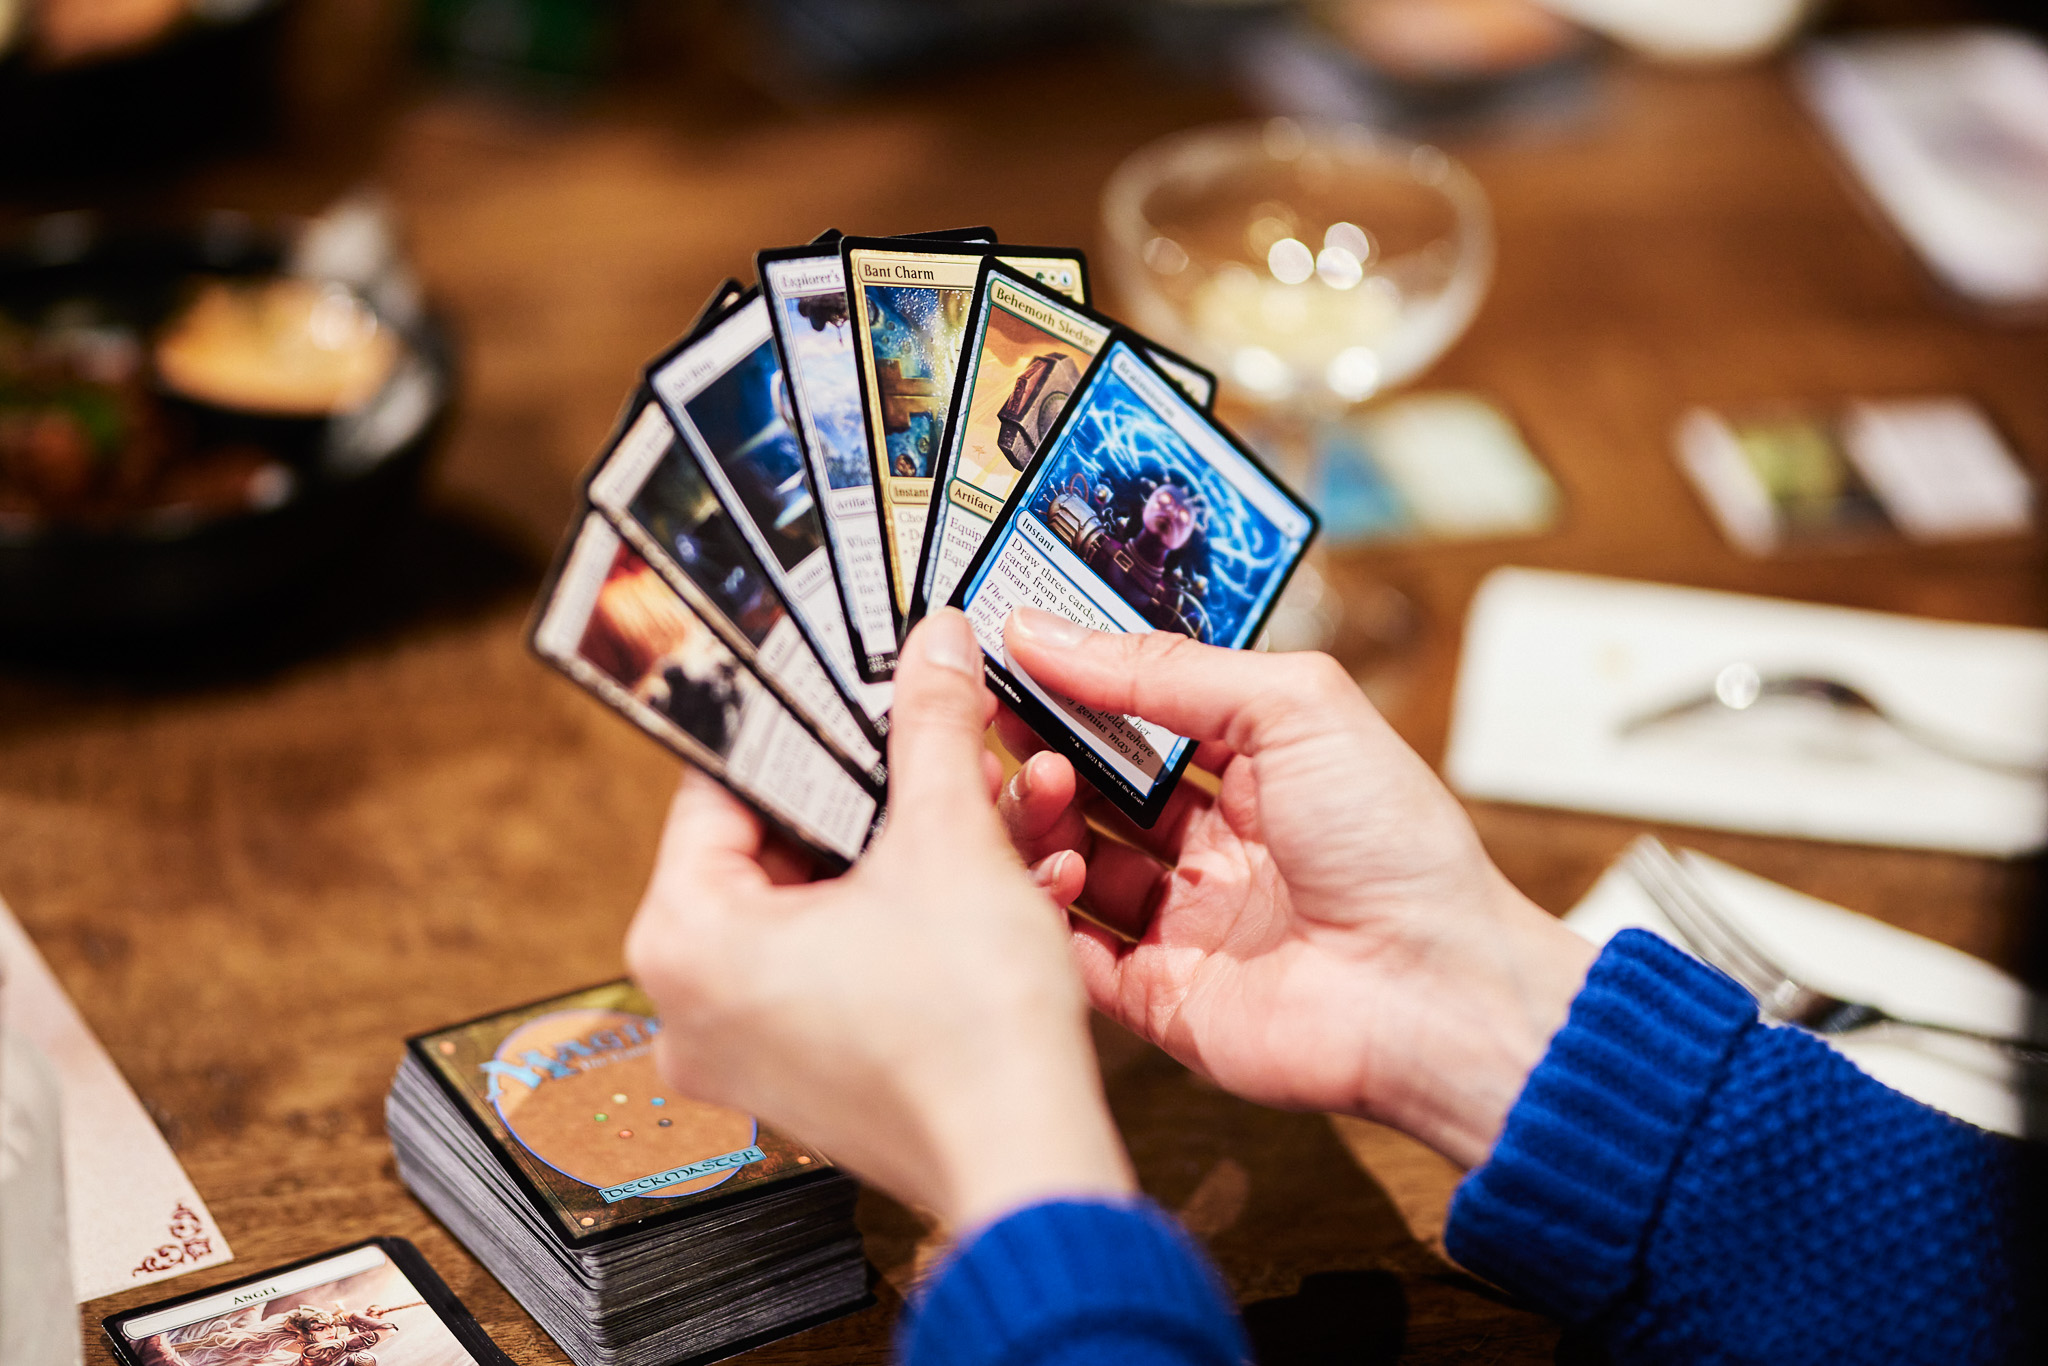 Magic the gathering being played